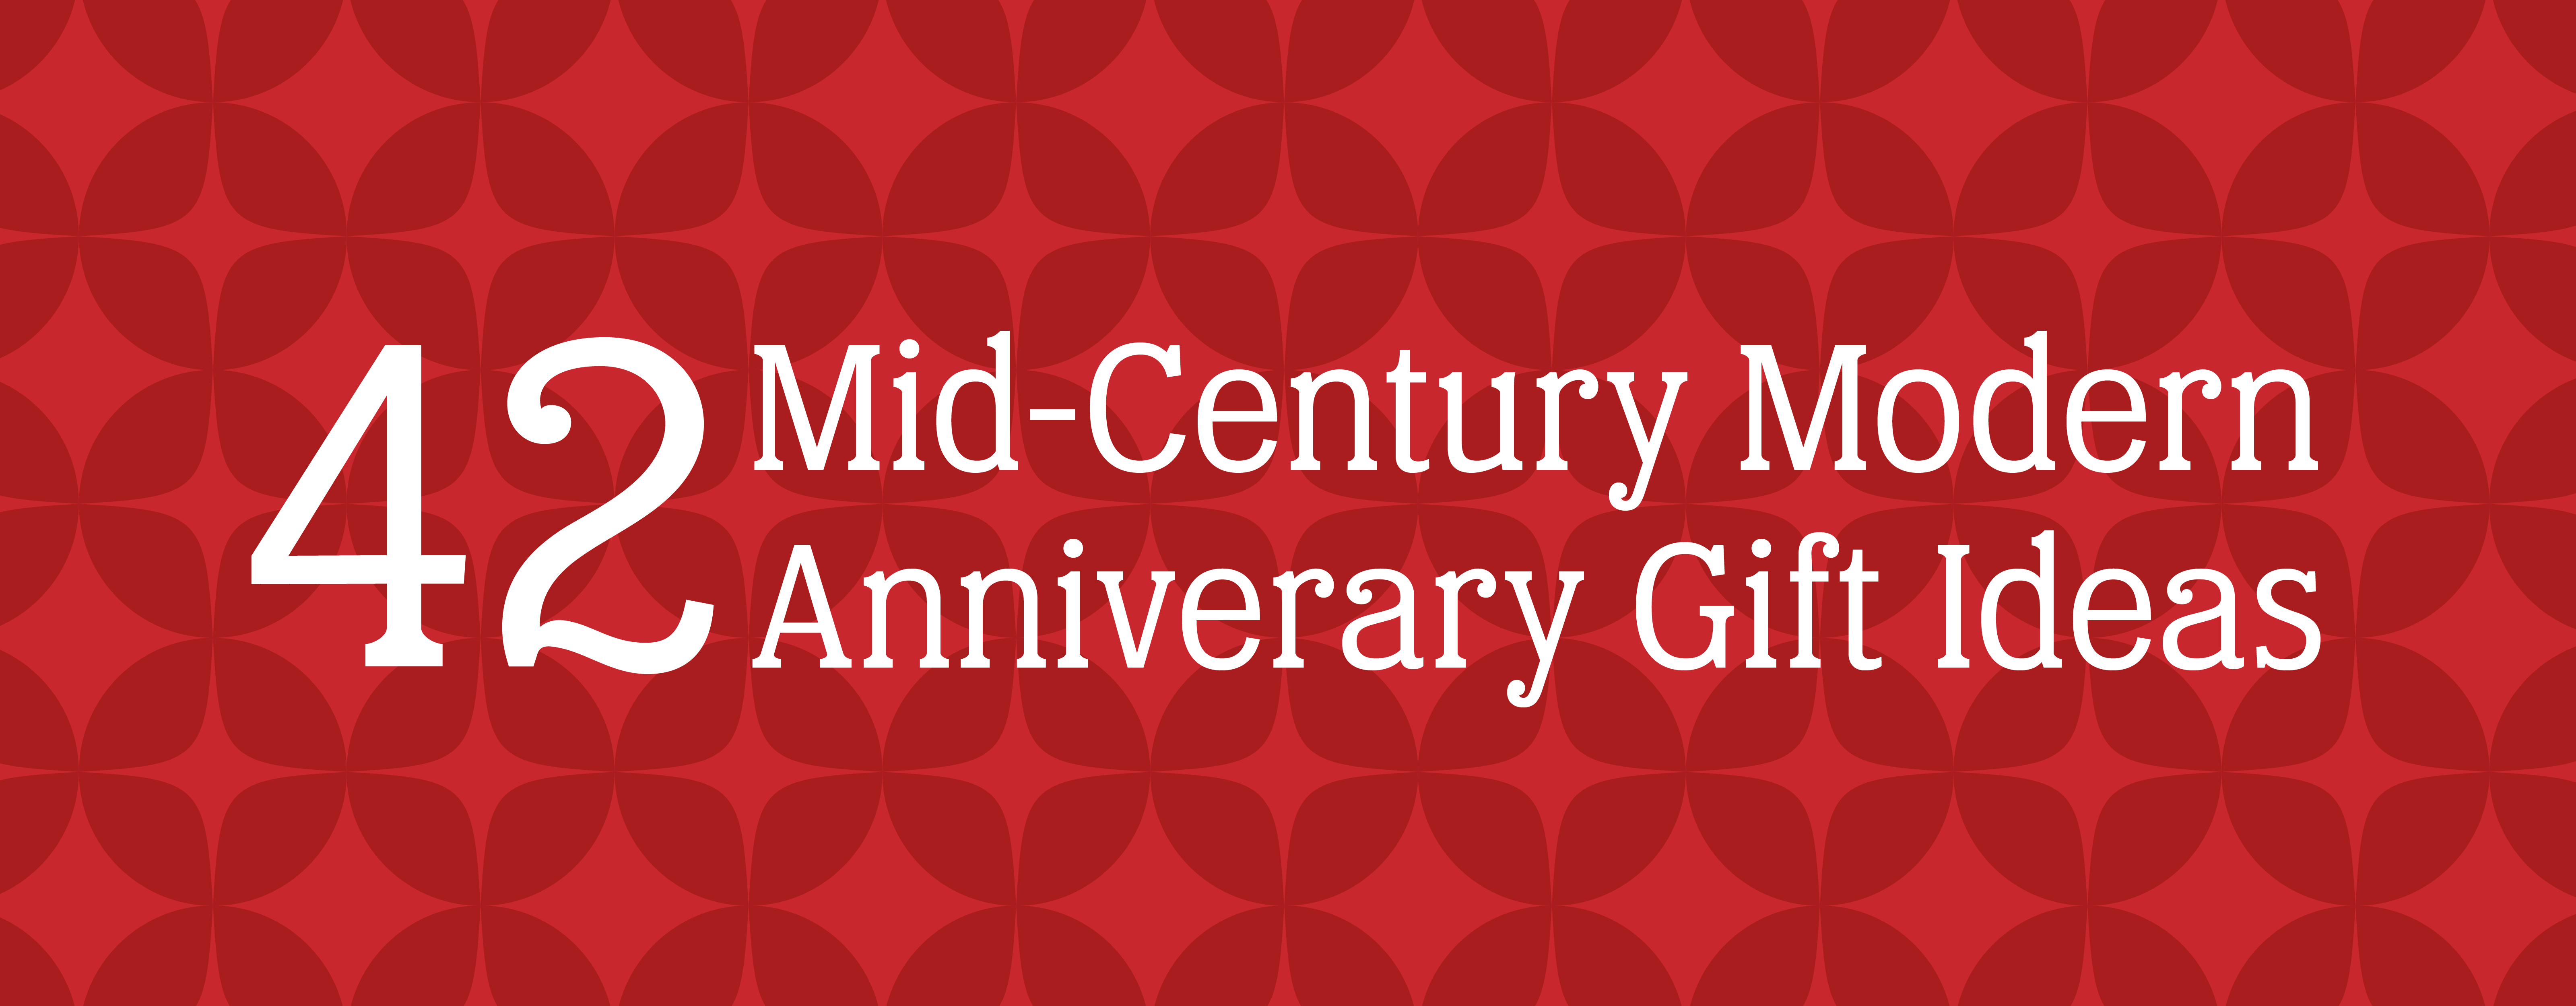 Abstract geometric pattern on a red background with a white text overlay that reads "42 Mid-Century Modern Anniversary Gift Ideas"